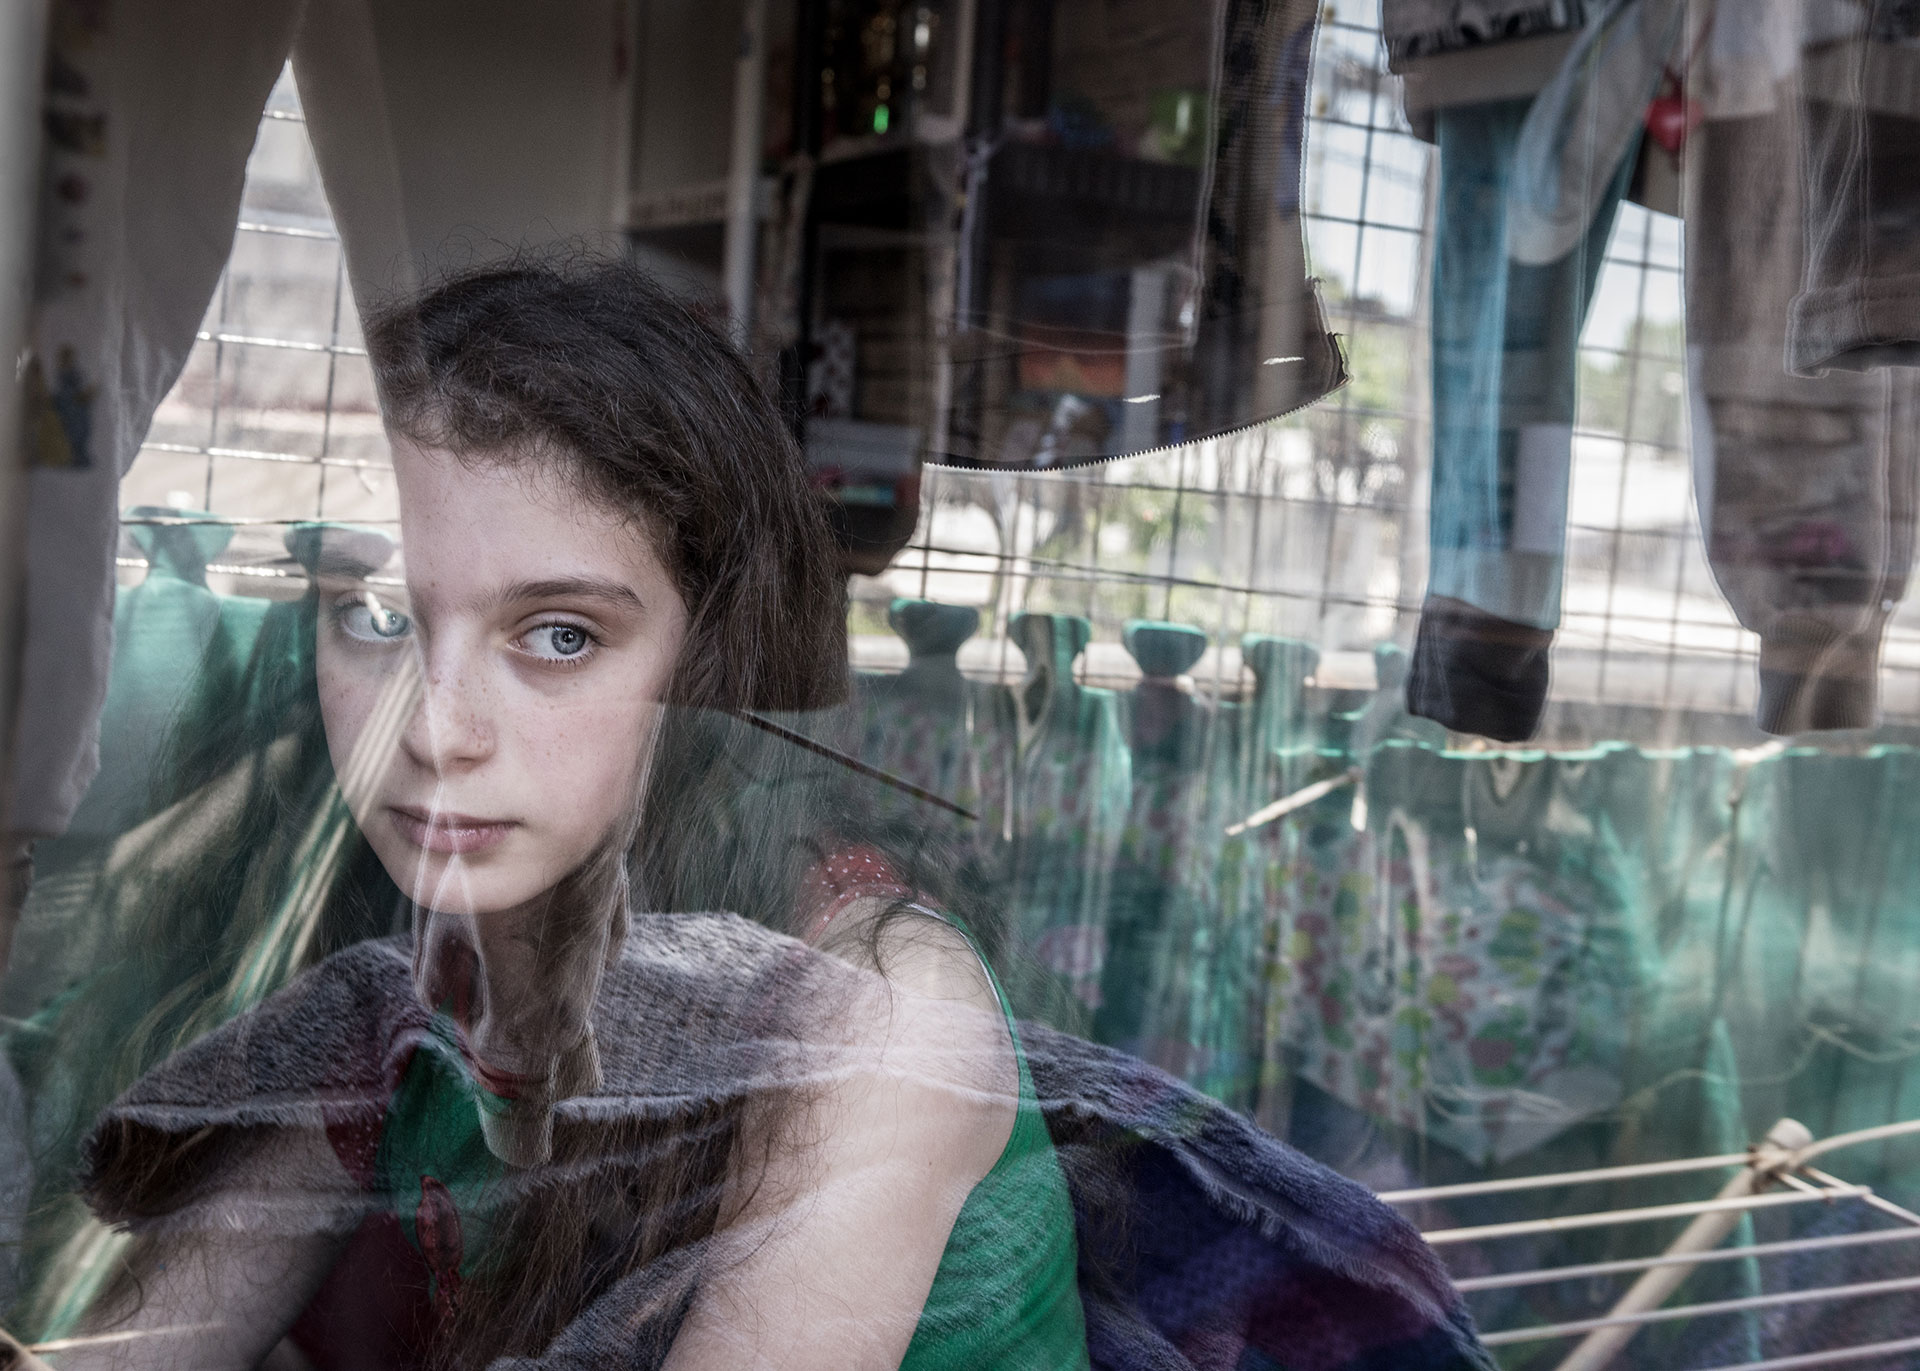 Rivka Schiller, 11 years, in her house. Her mother was victim of many death threats by her ex husband. She had filed 45 complains to the police without getting any protection from them. He also attempted to strangle her in front of her daughters. They live in a kind of prison.